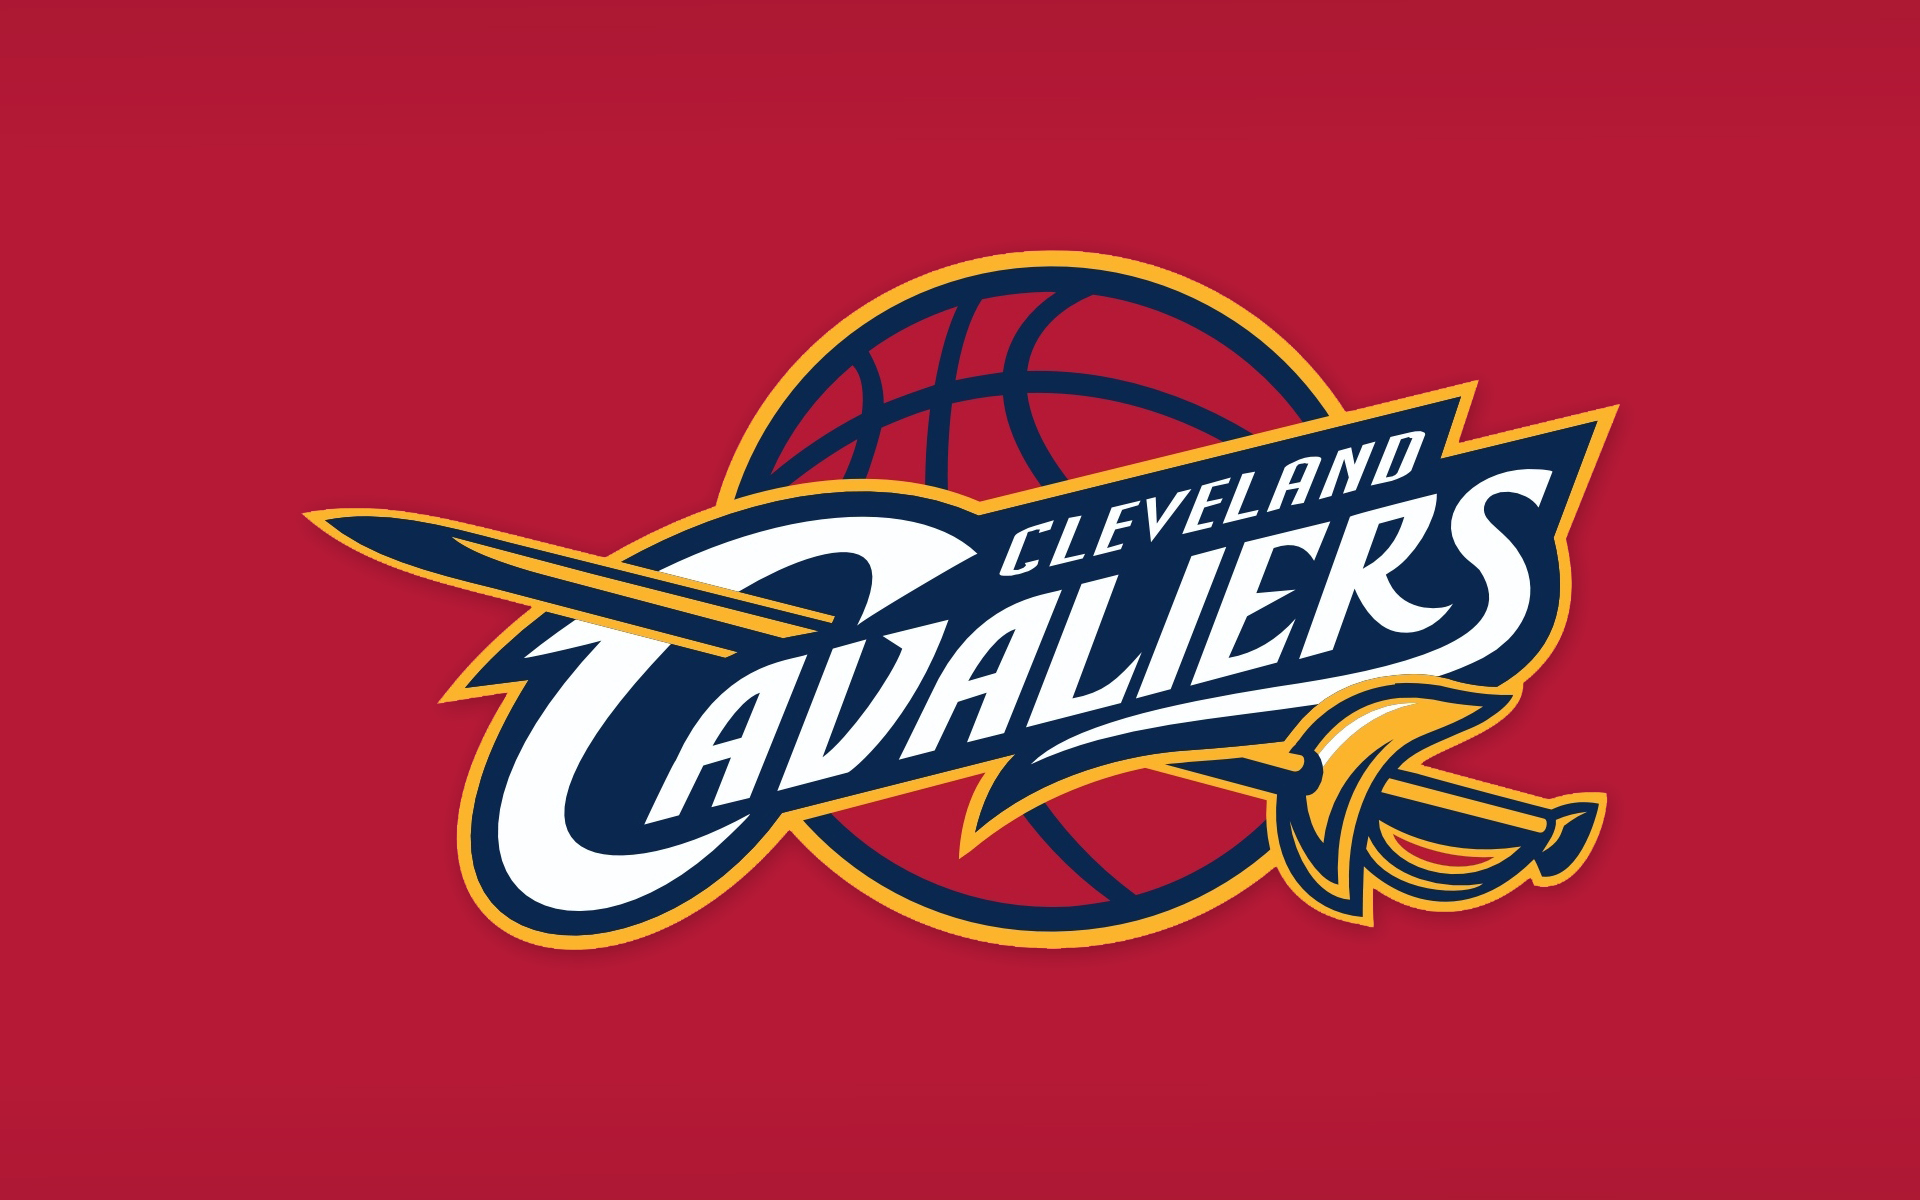 Cleveland Cavaliers Wallpaper Phone Px Kb Sports